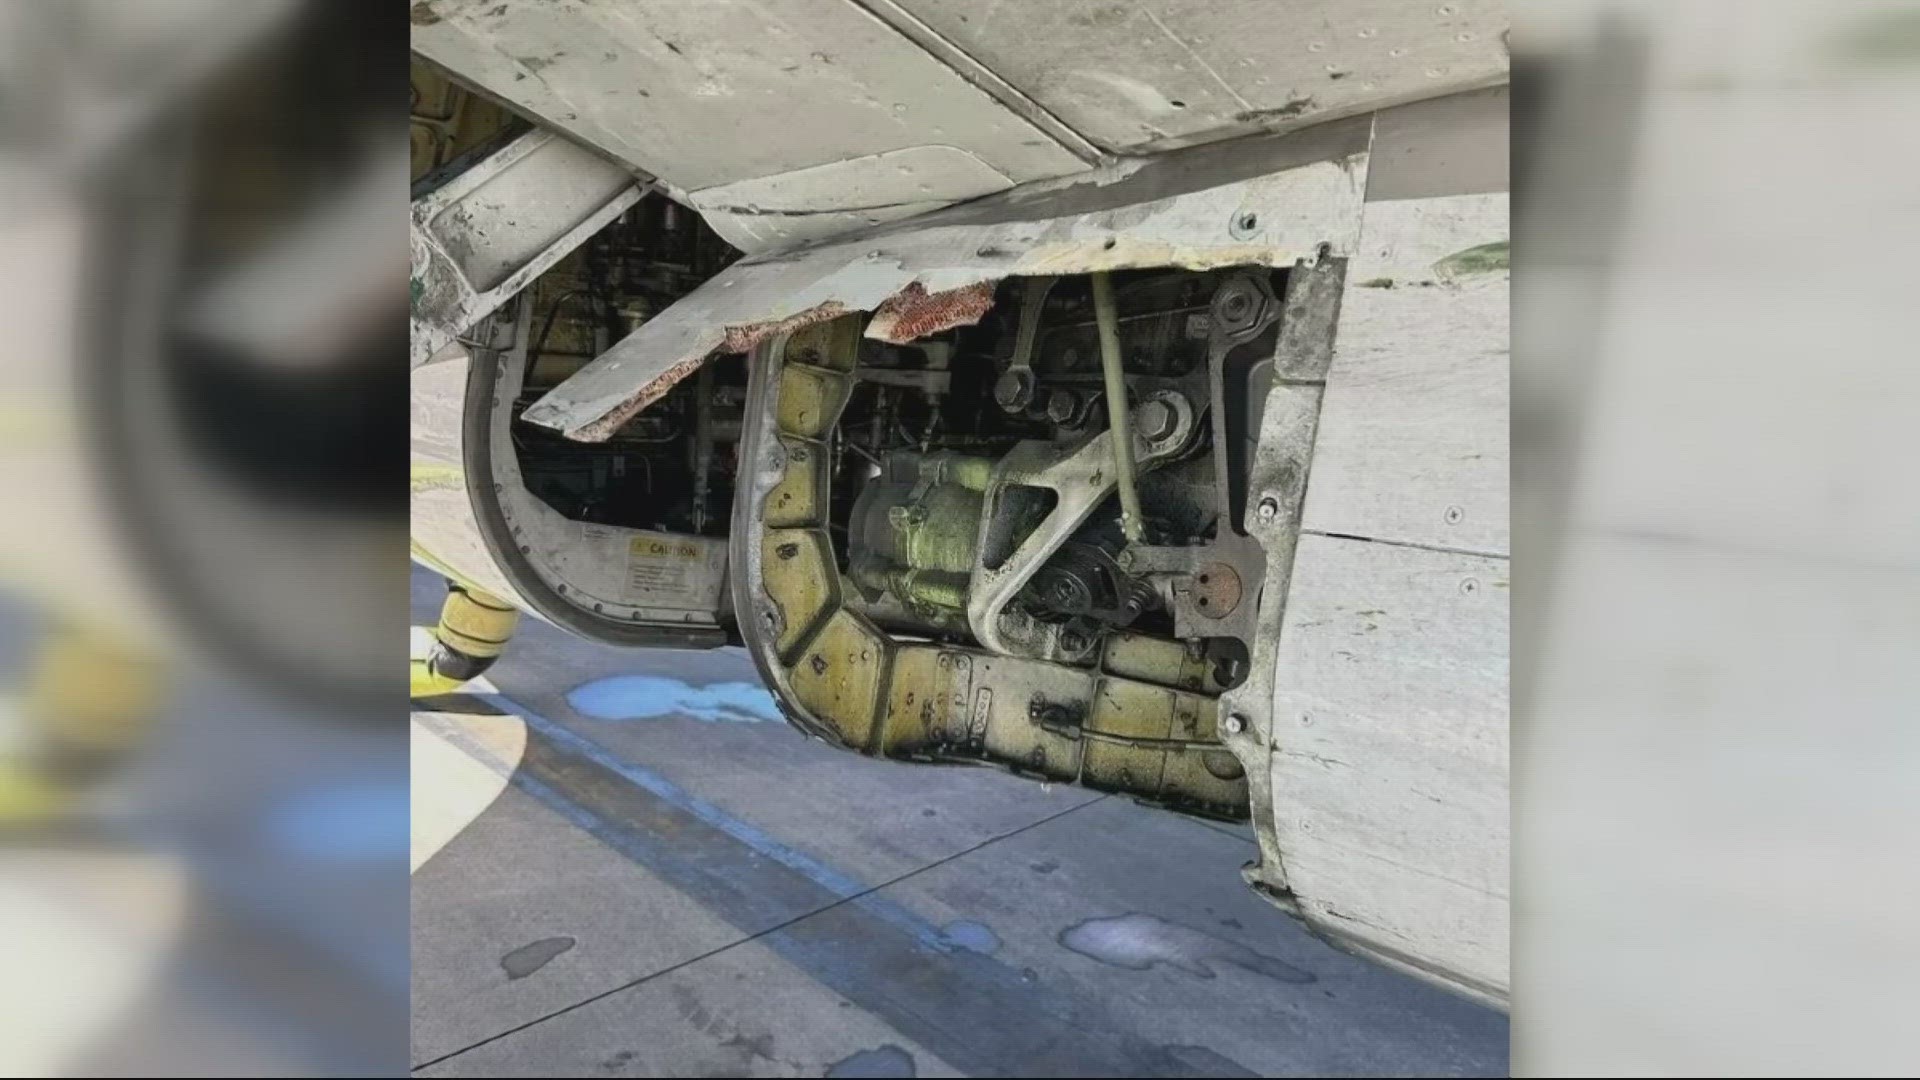 A Boeing 737-800 was found to have a missing panel after a United Airlines flight arrived at its destination in southern Oregon on Friday, airport officials said.